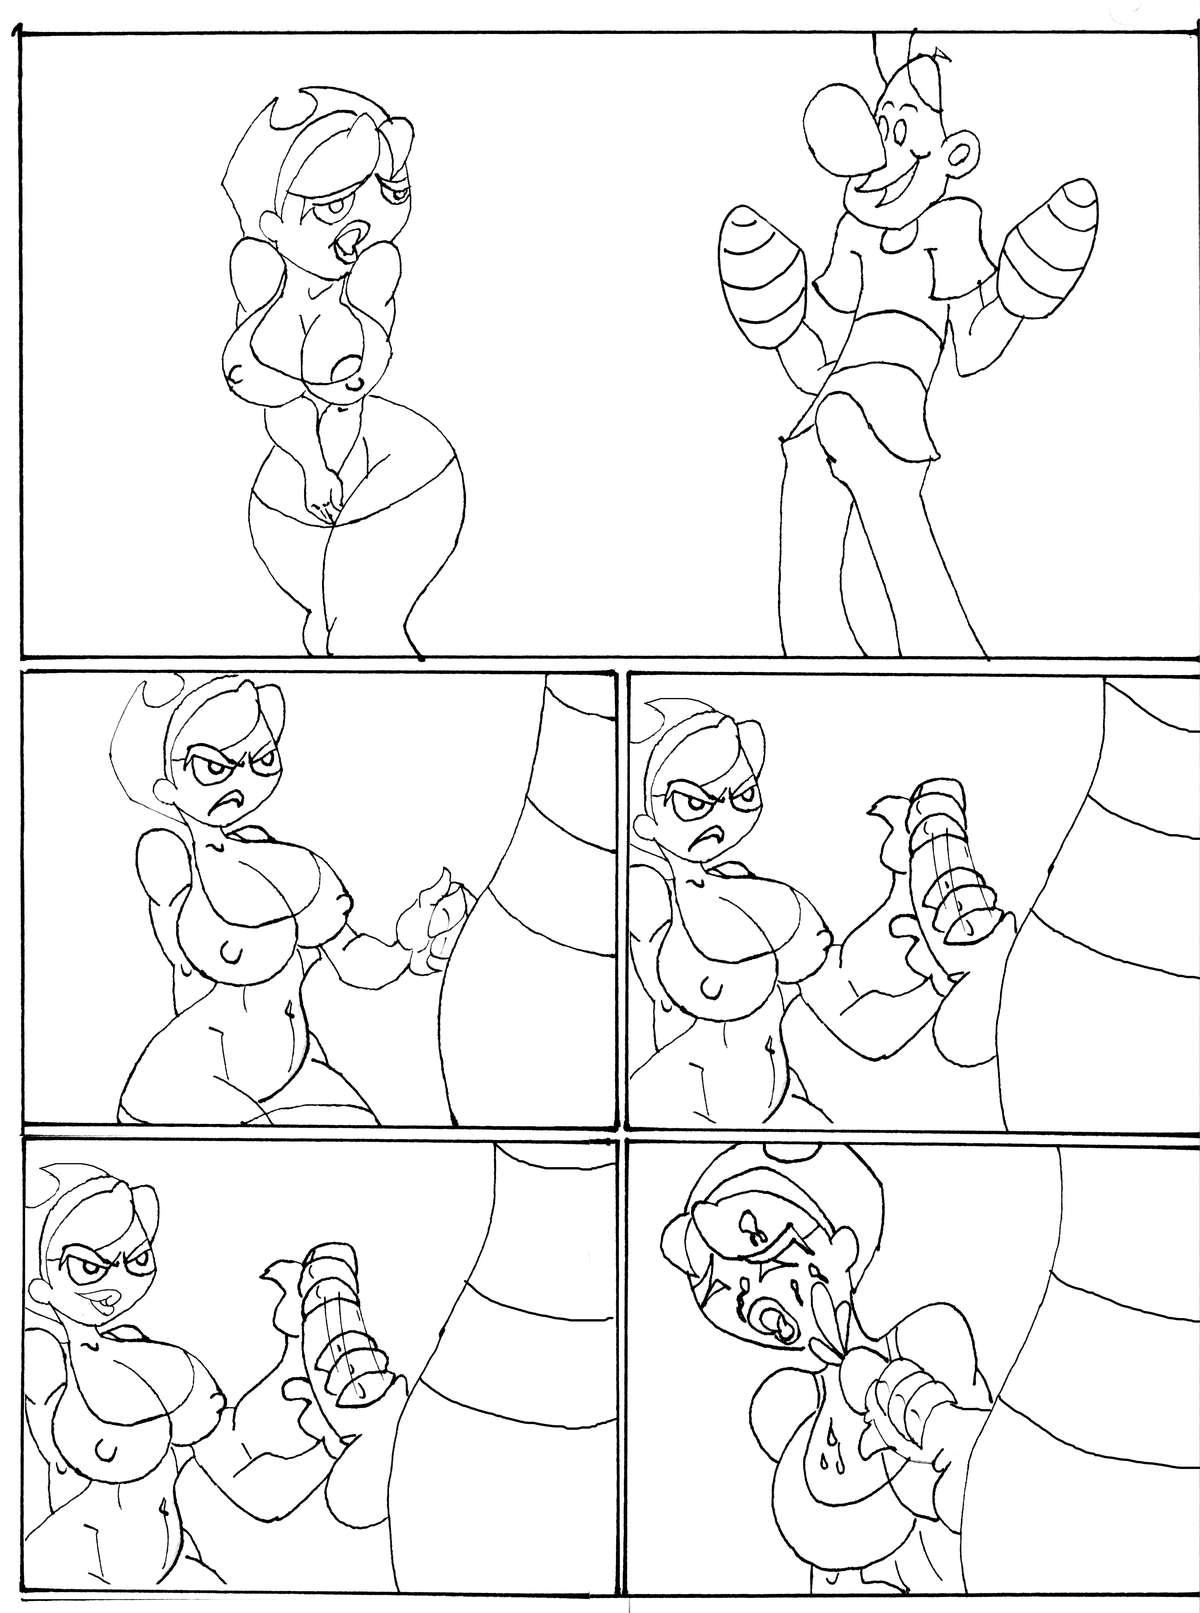 Bulge billy y mandy - The grim adventures of billy and mandy Pack - Page 5